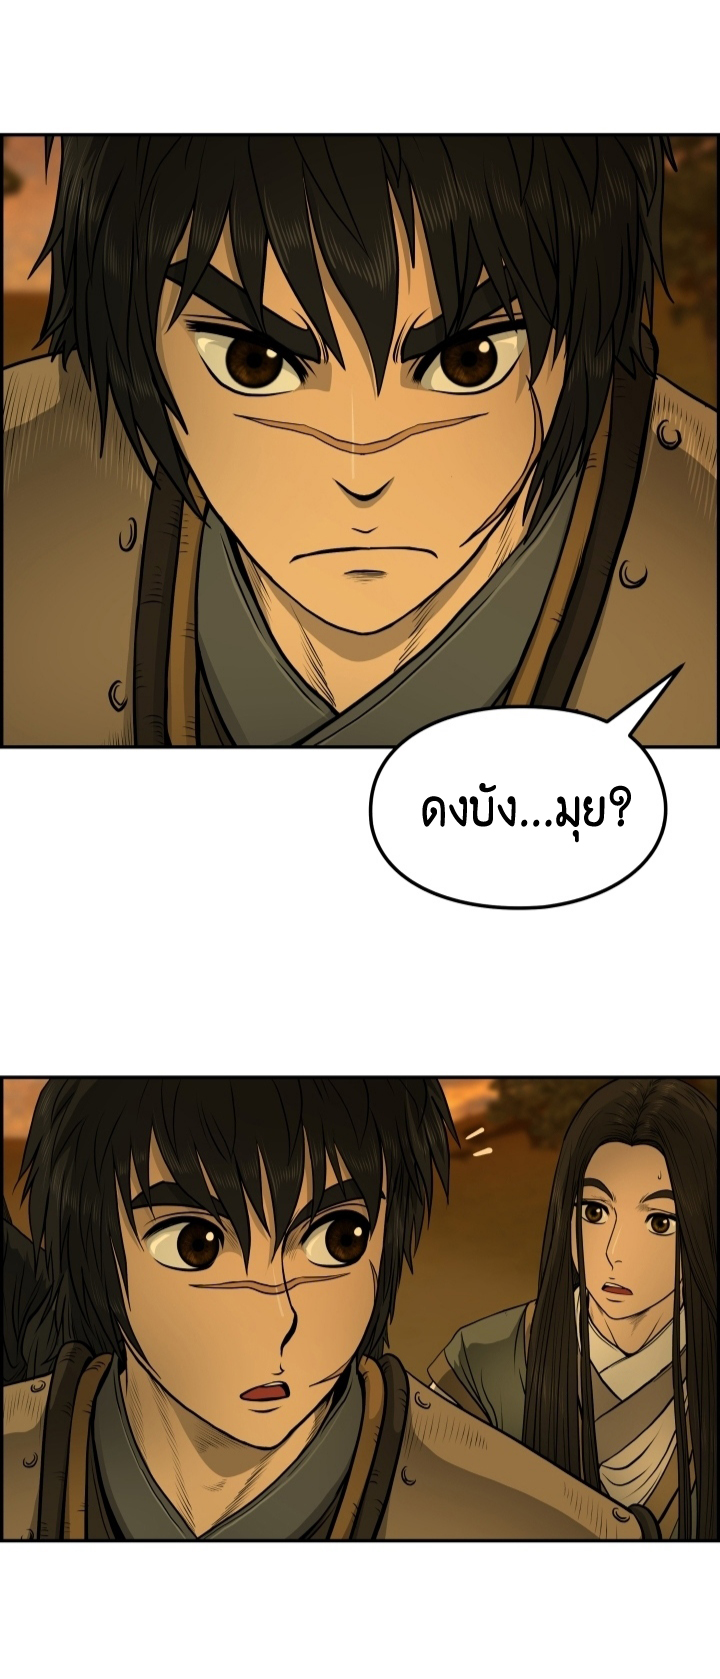 Blade of Wind and Thunder 28 (20)